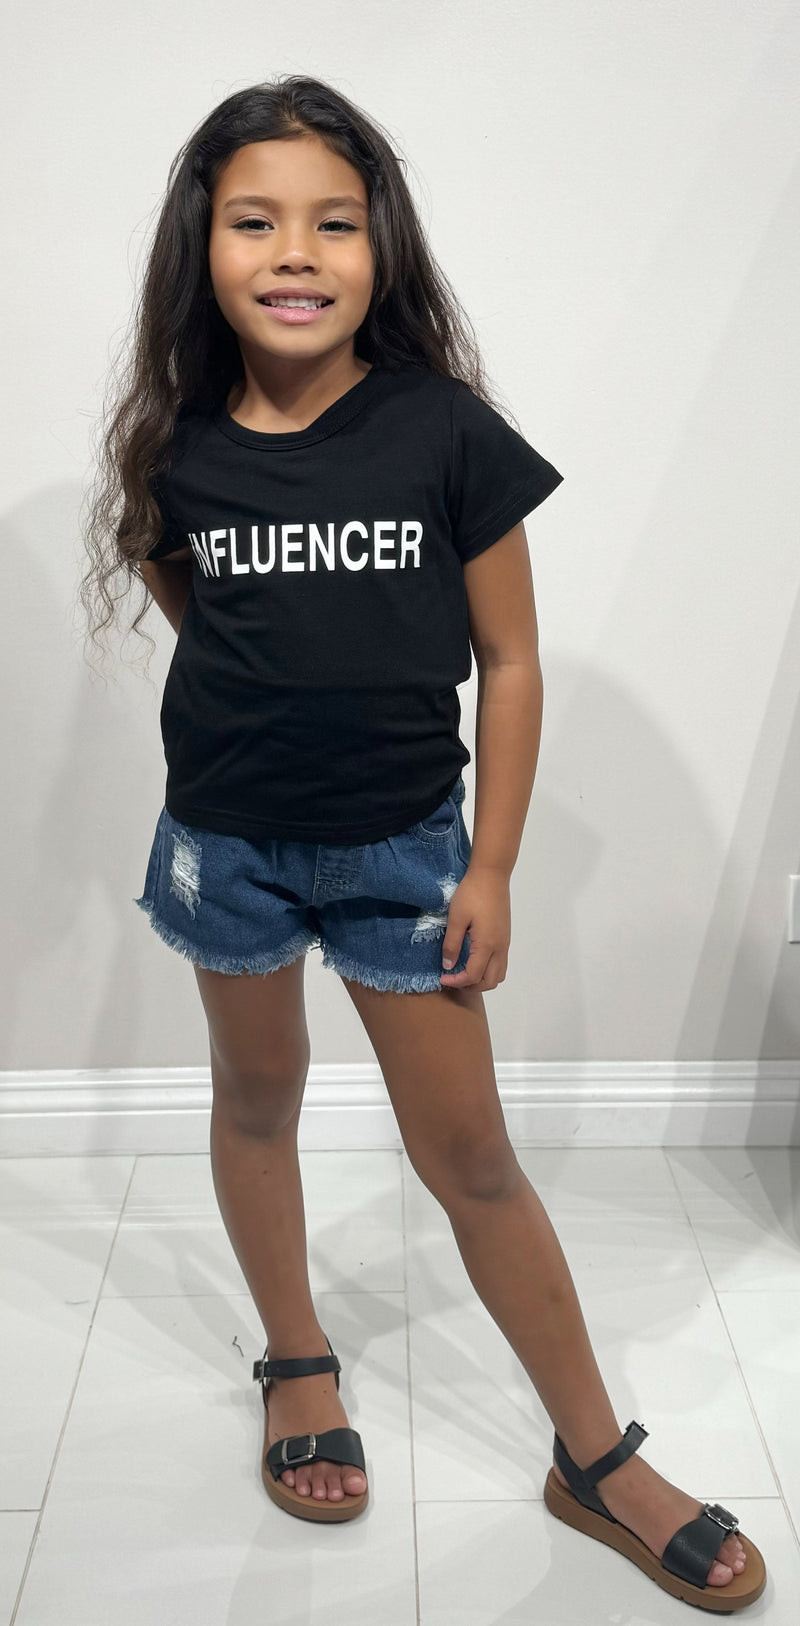 Jeans Warehouse Hawaii - S/L PRINT TOPS 2T-4T - INFLUENCER TOP | KIDS SIZE 2T-4T | By GREENWELL PROMOTIONS LTD